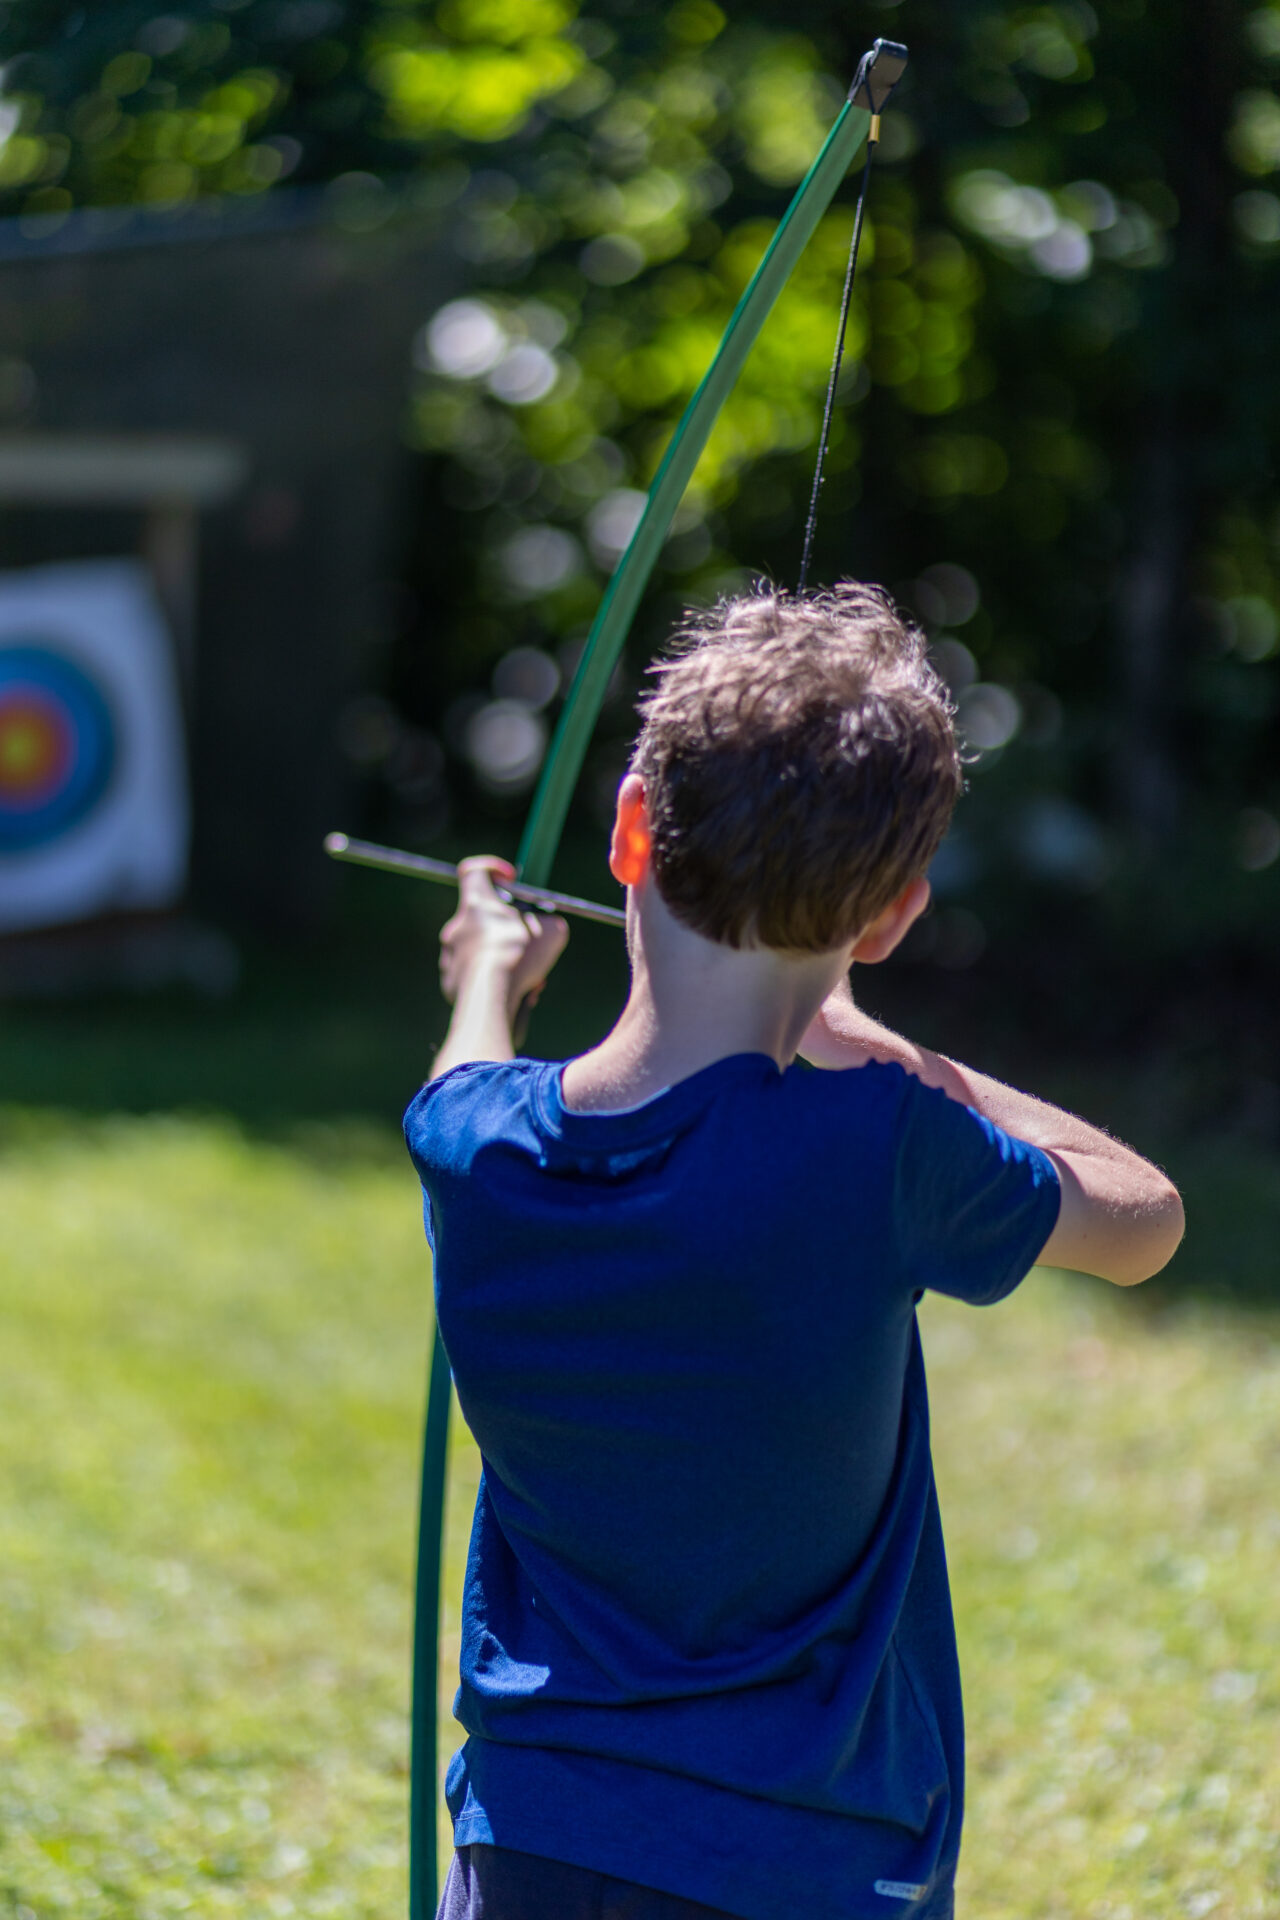 A young boy expertly aims his BowTrax at an archery target.